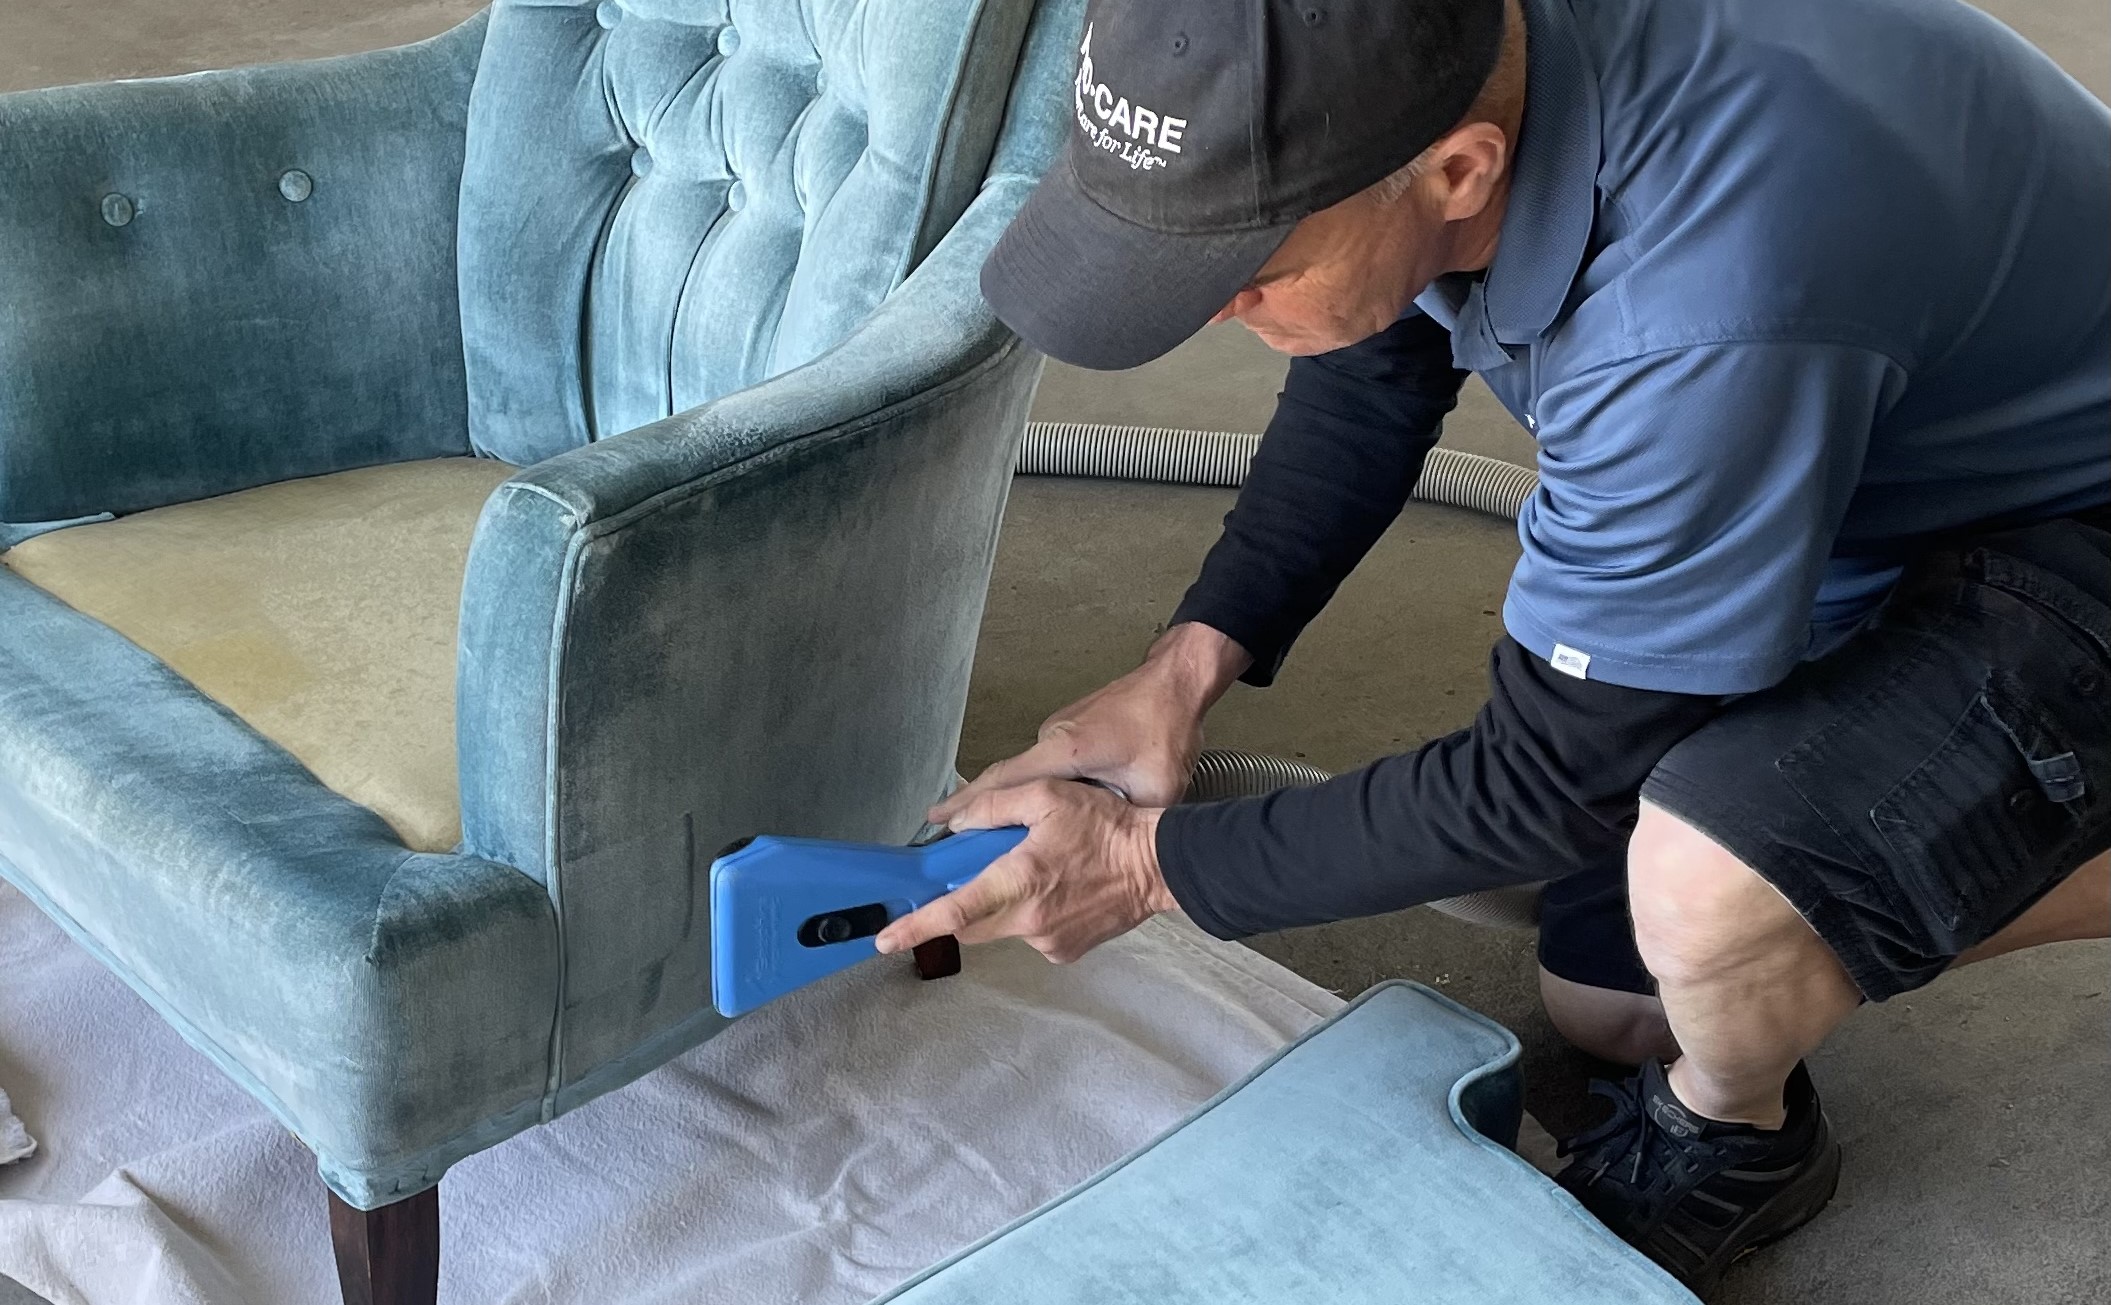 Professional upholstery cleaning is advised for vintage and high-dollar furnishings.